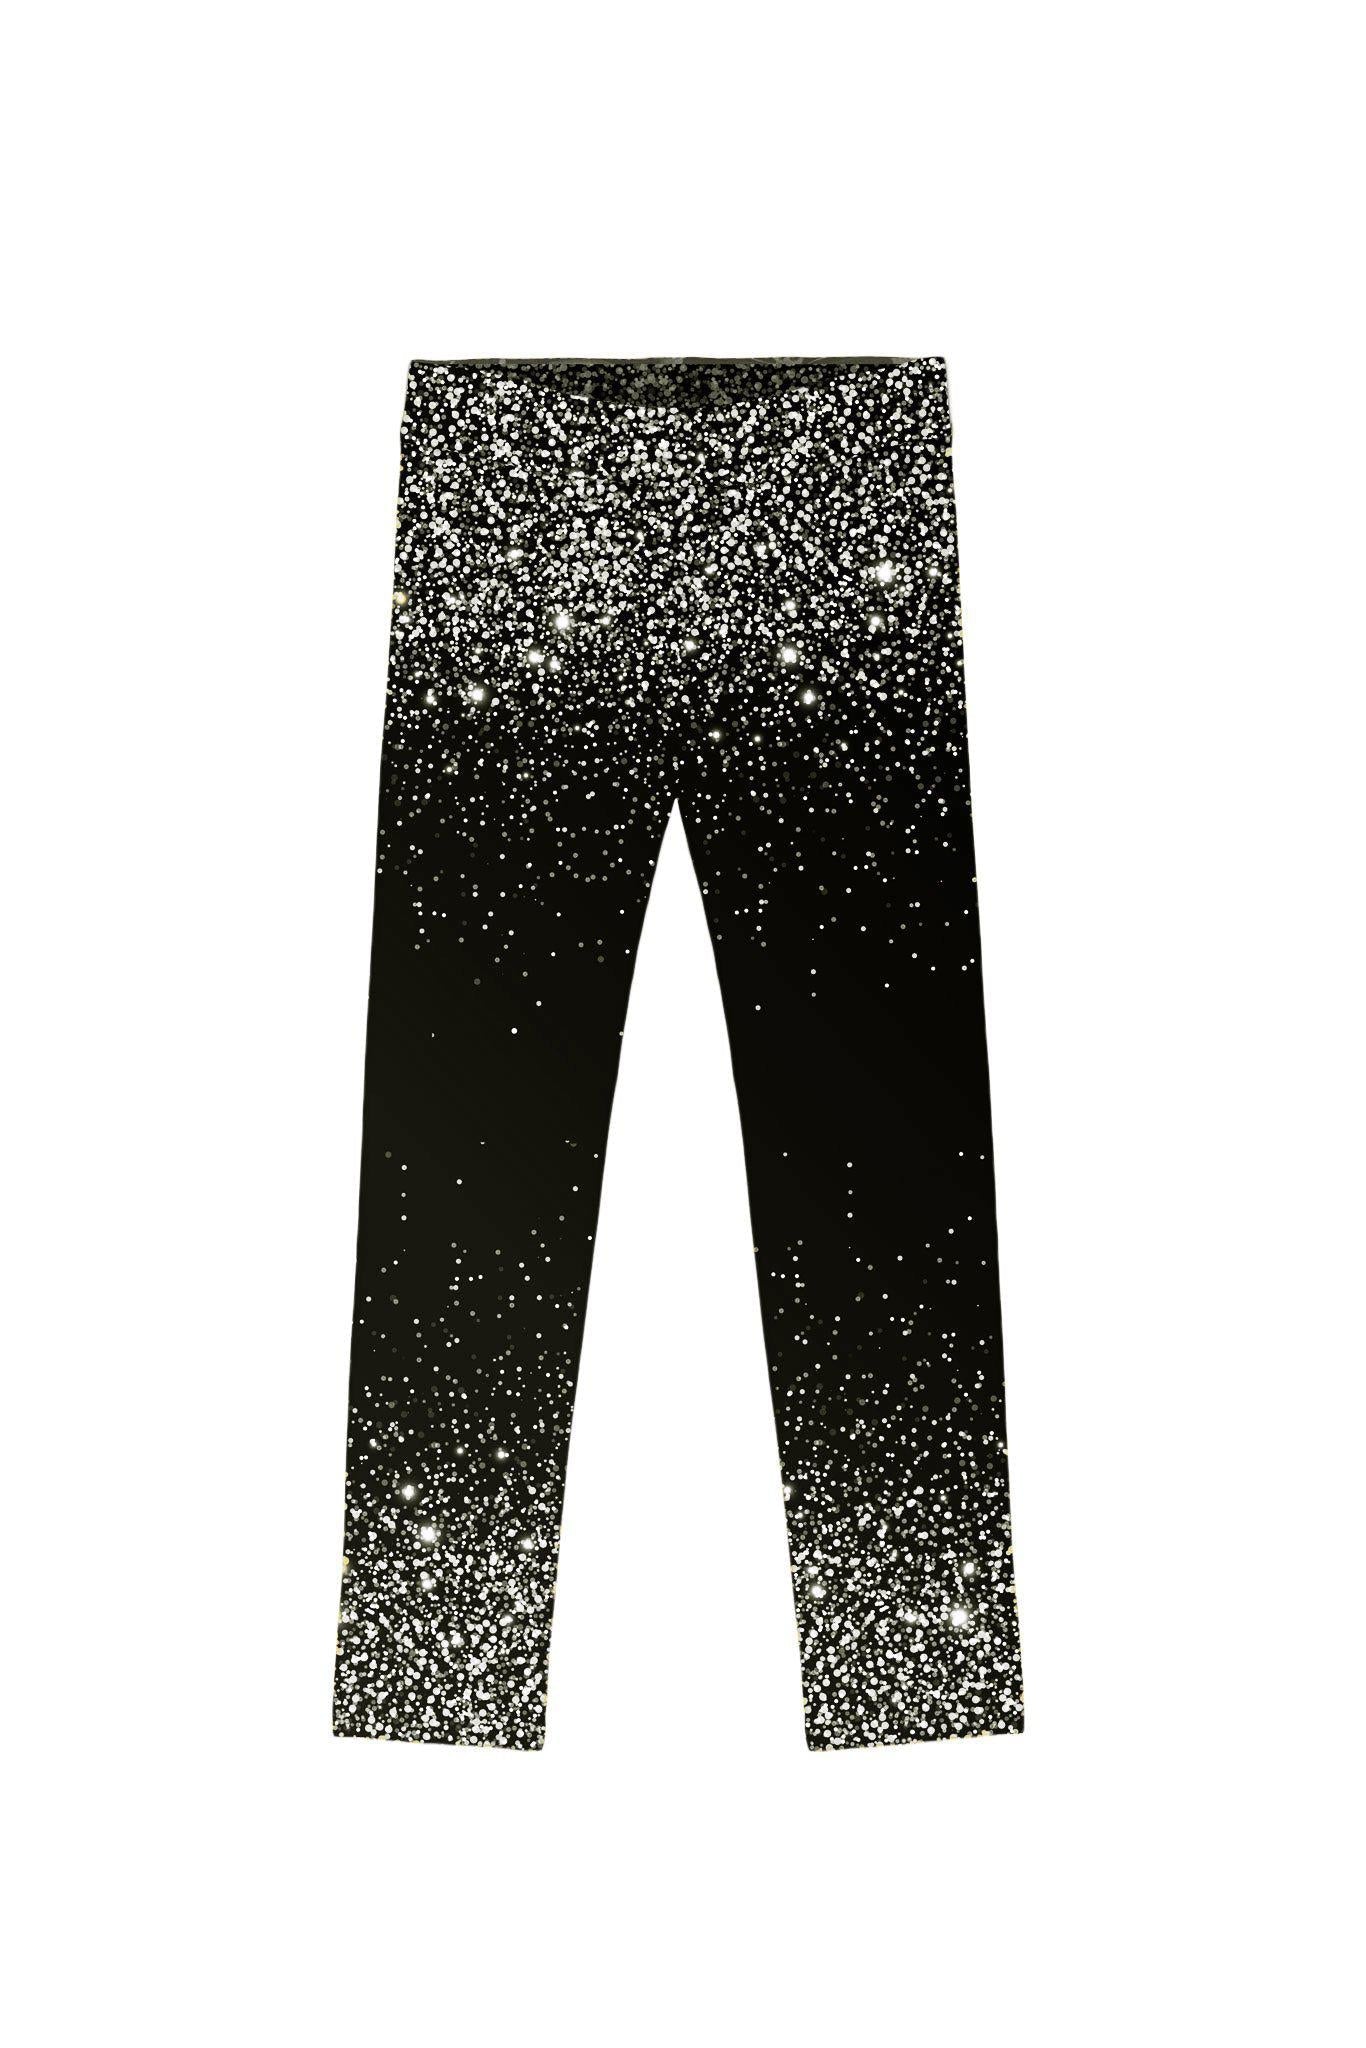 3 for $49! Silver Chichi Lucy Stunning Black Printed Leggings - Kids - Pineapple Clothing